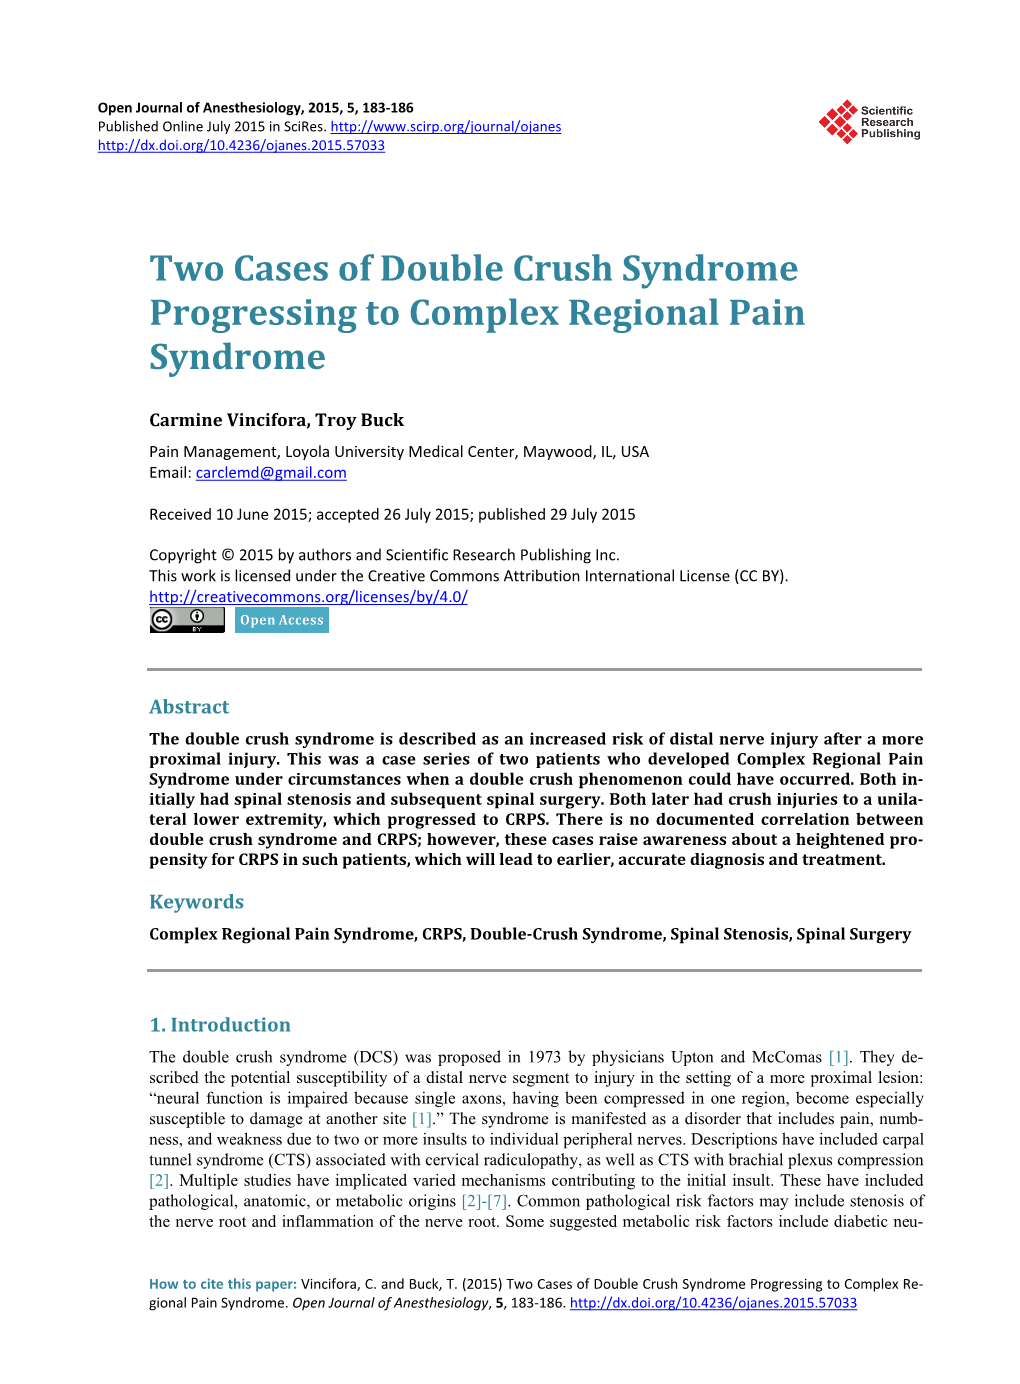 Two Cases of Double Crush Syndrome Progressing to Complex Regional Pain Syndrome